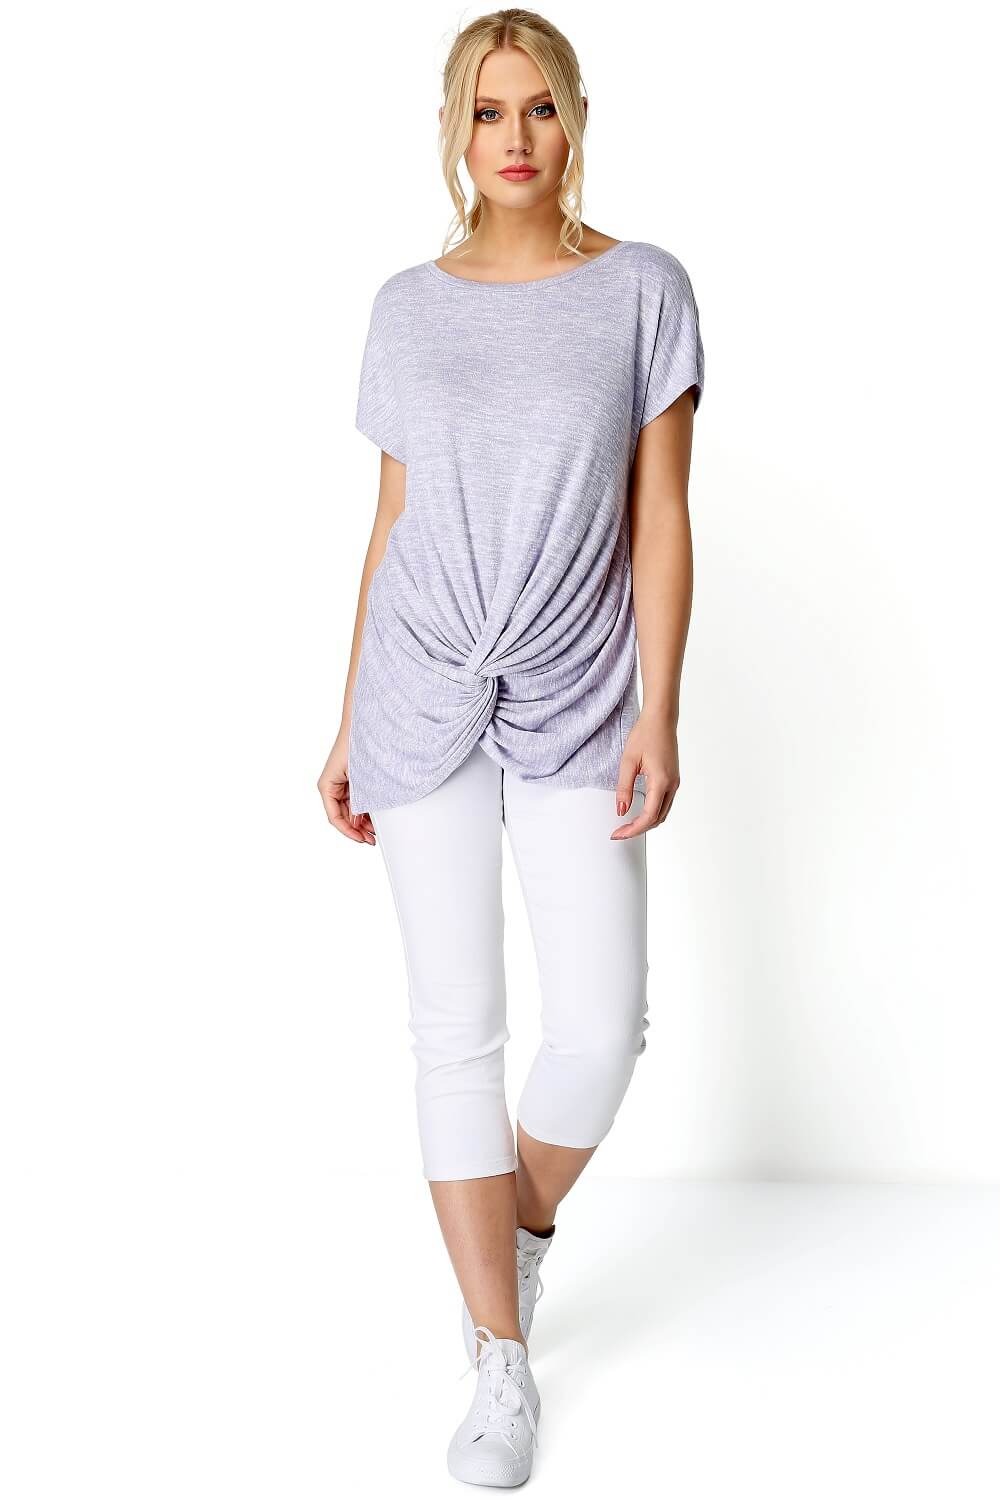 Lilac Knot Front Short Sleeve Top, Image 2 of 8